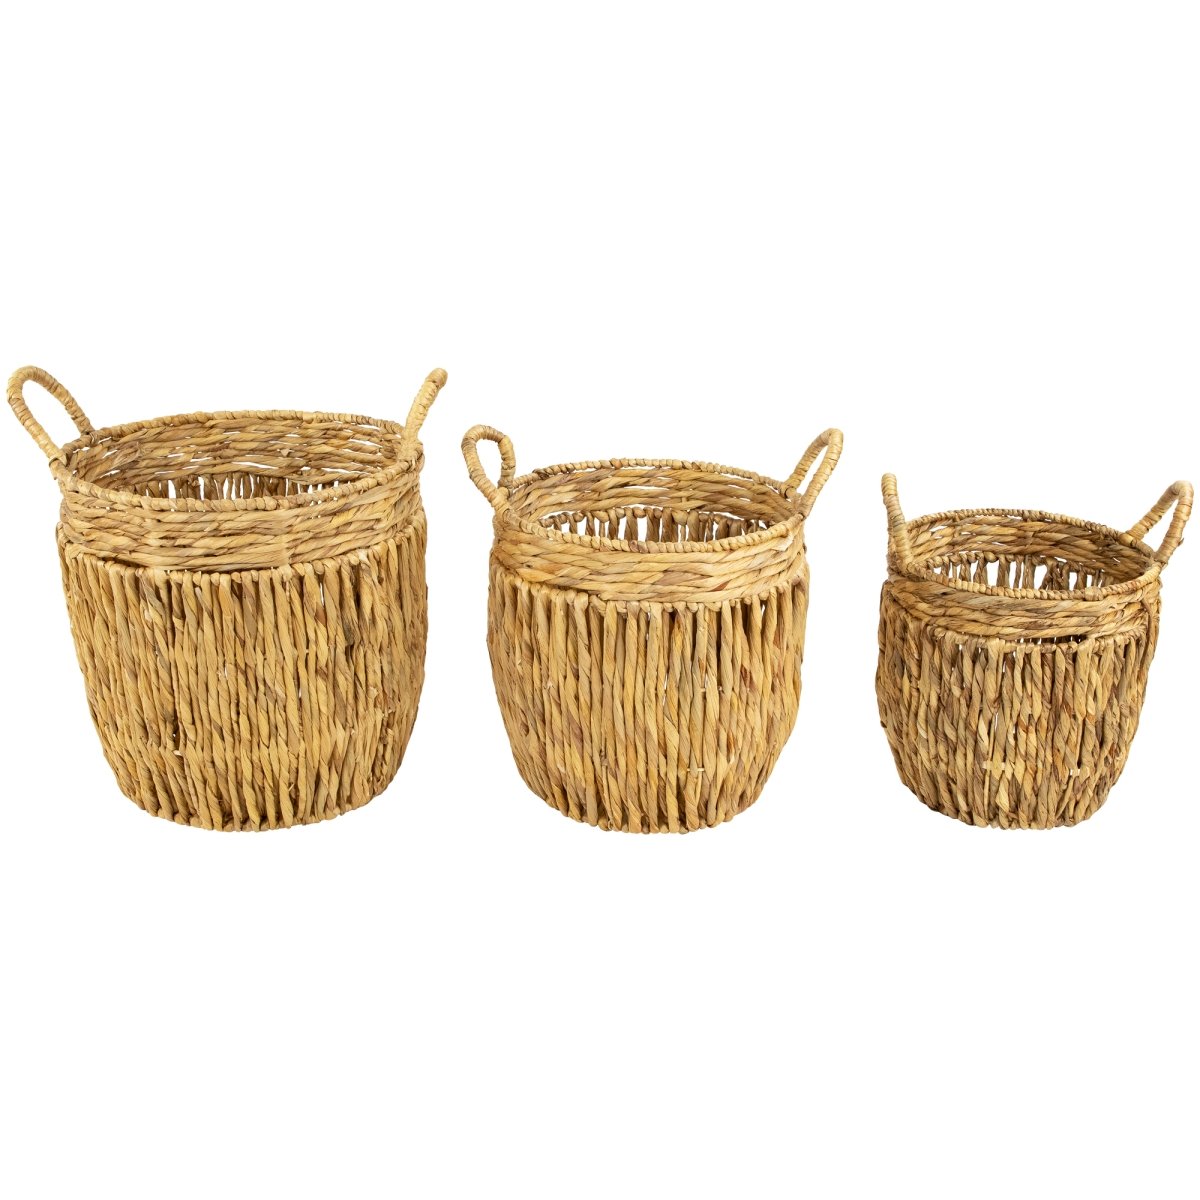 Picture of Northlight 35737394 15.75 in. Textured Woven Water Hyacinth Rustic Storage Baskets with Handles - Set of 3